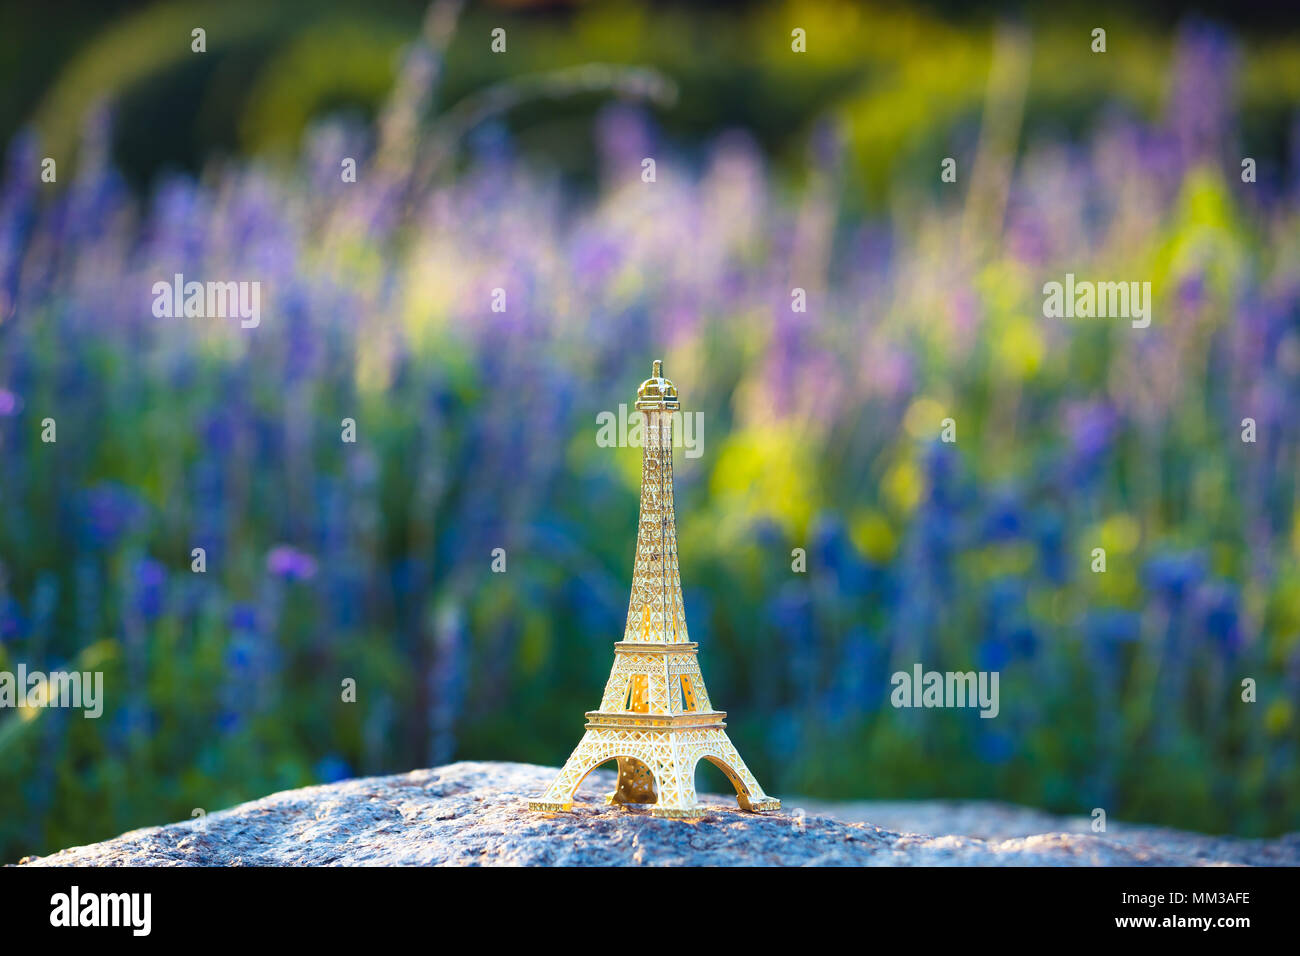 miniaturized eiffel tower with lavander fields in background in day . french culture . Stock Photo